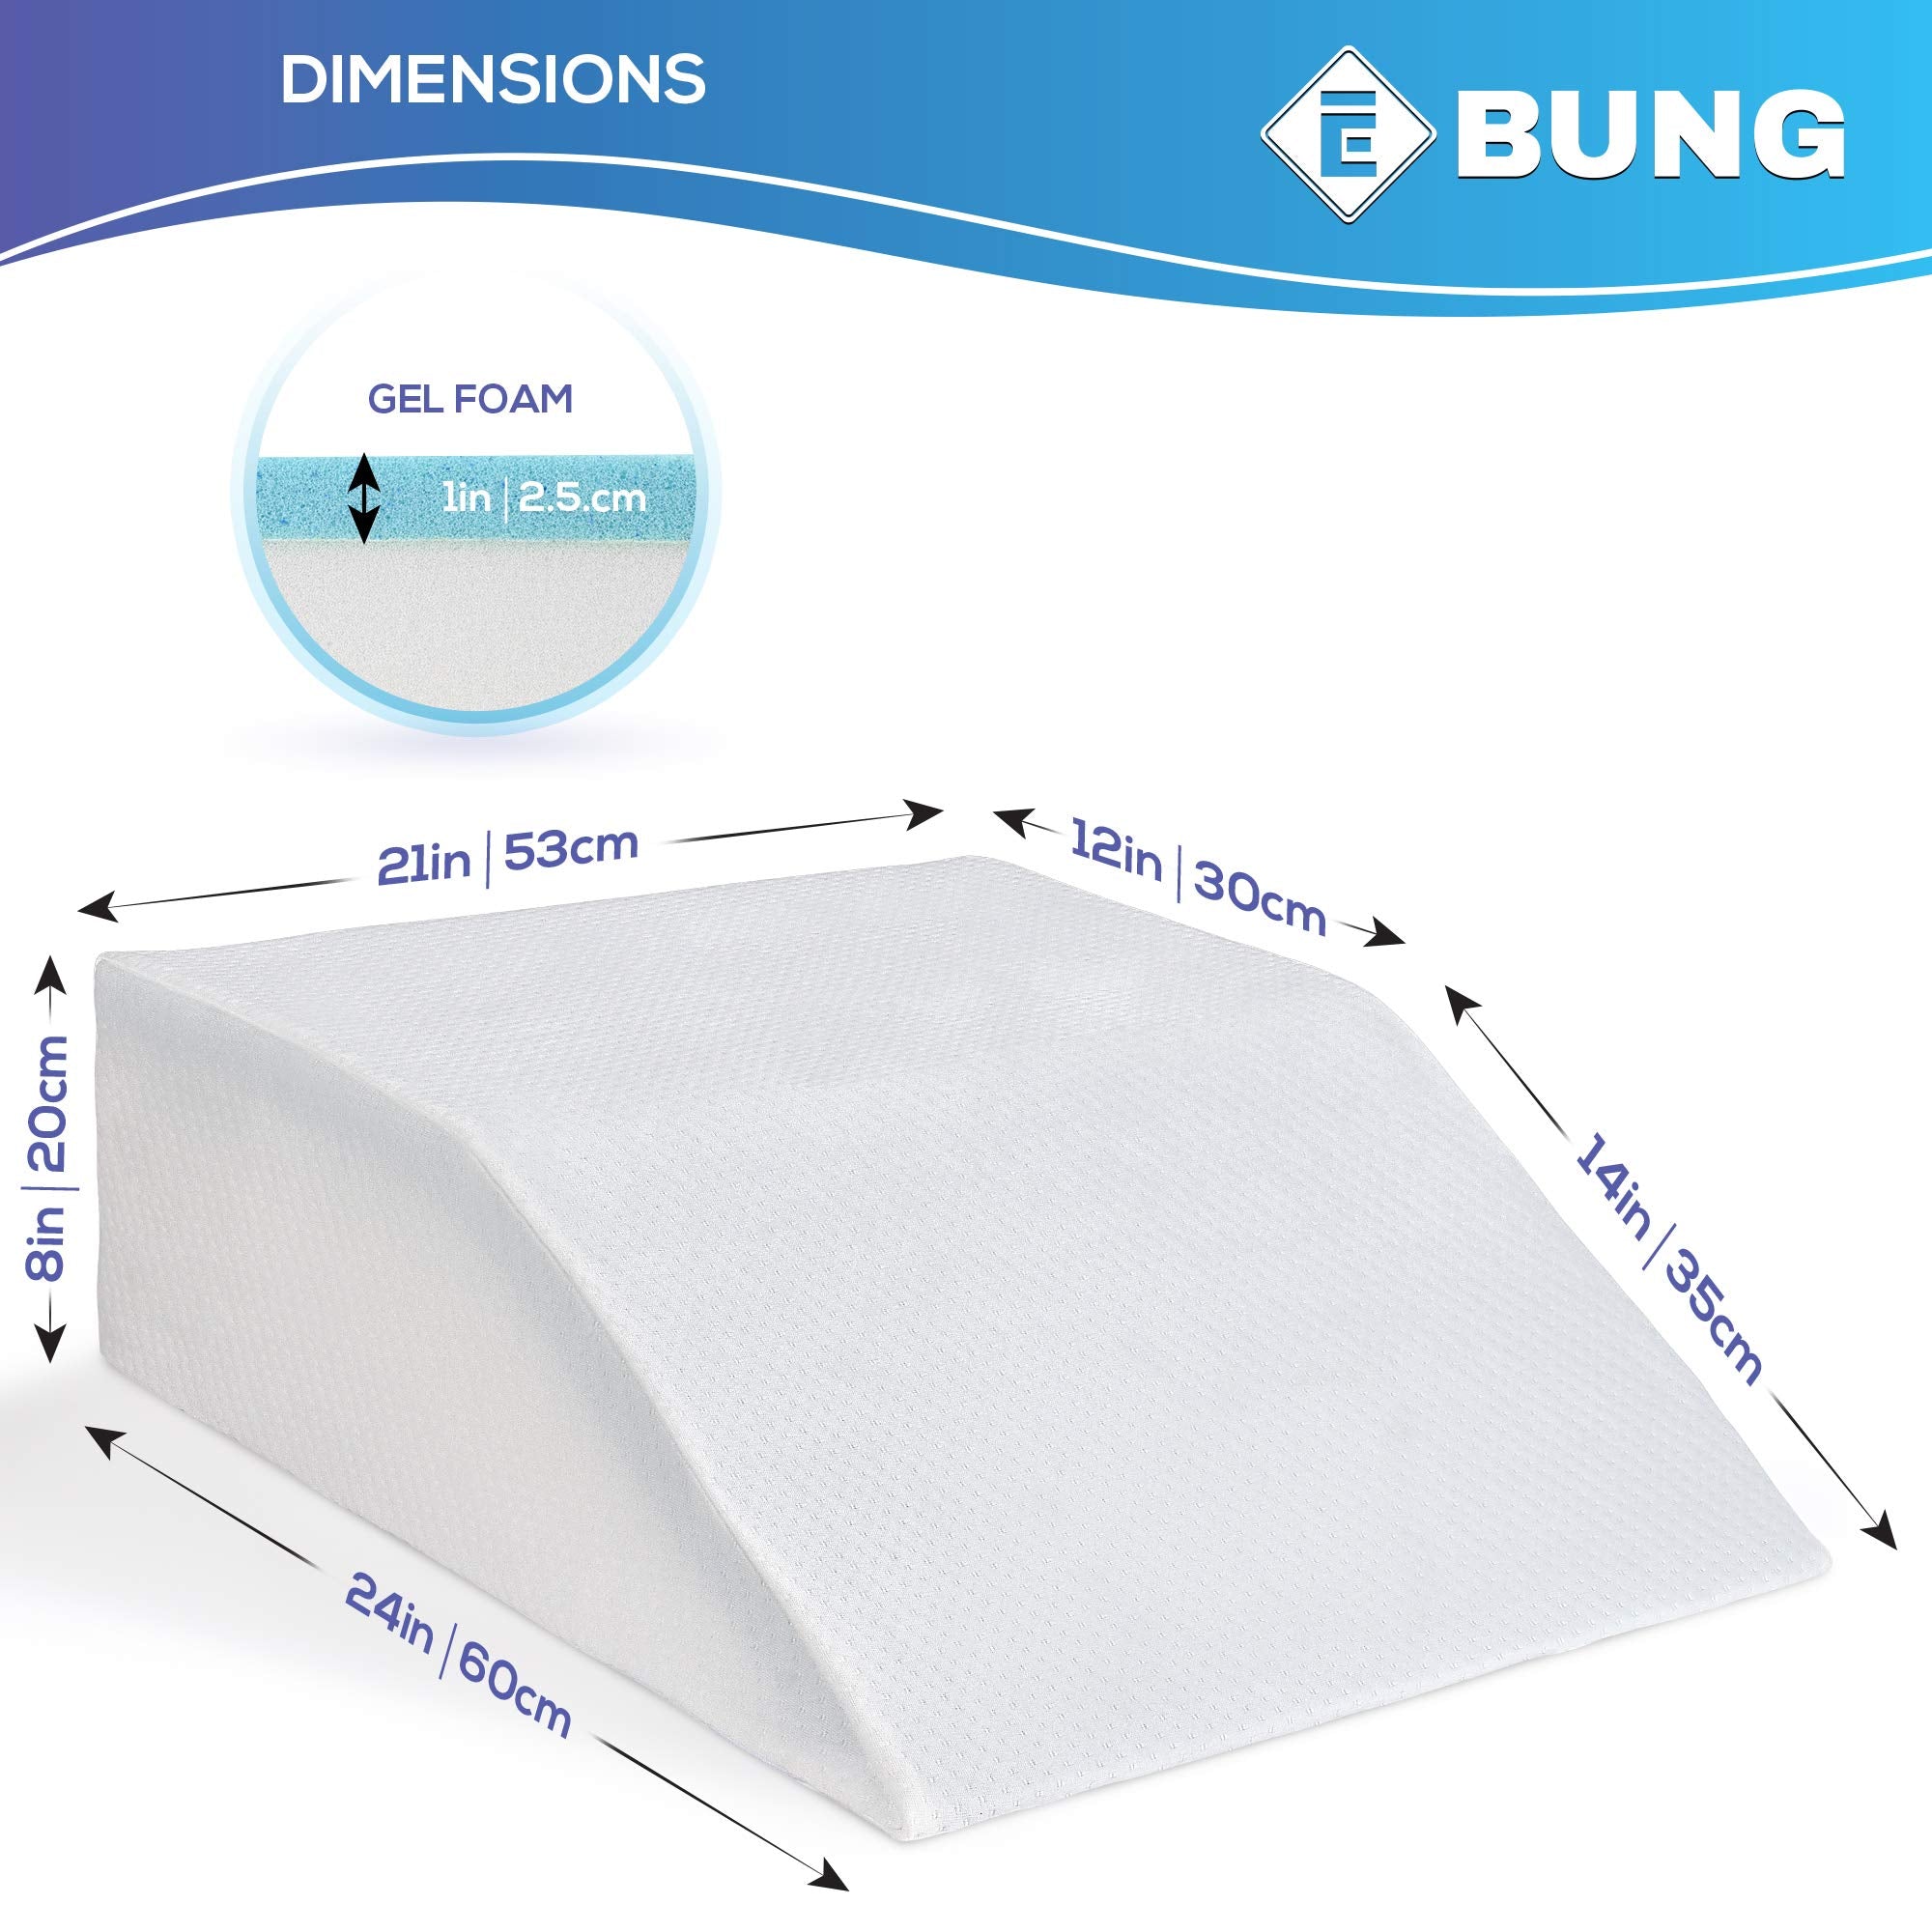 Ebung Leg Elevation Memory Foam Pillow with Removeable, Washable Cover  - Good